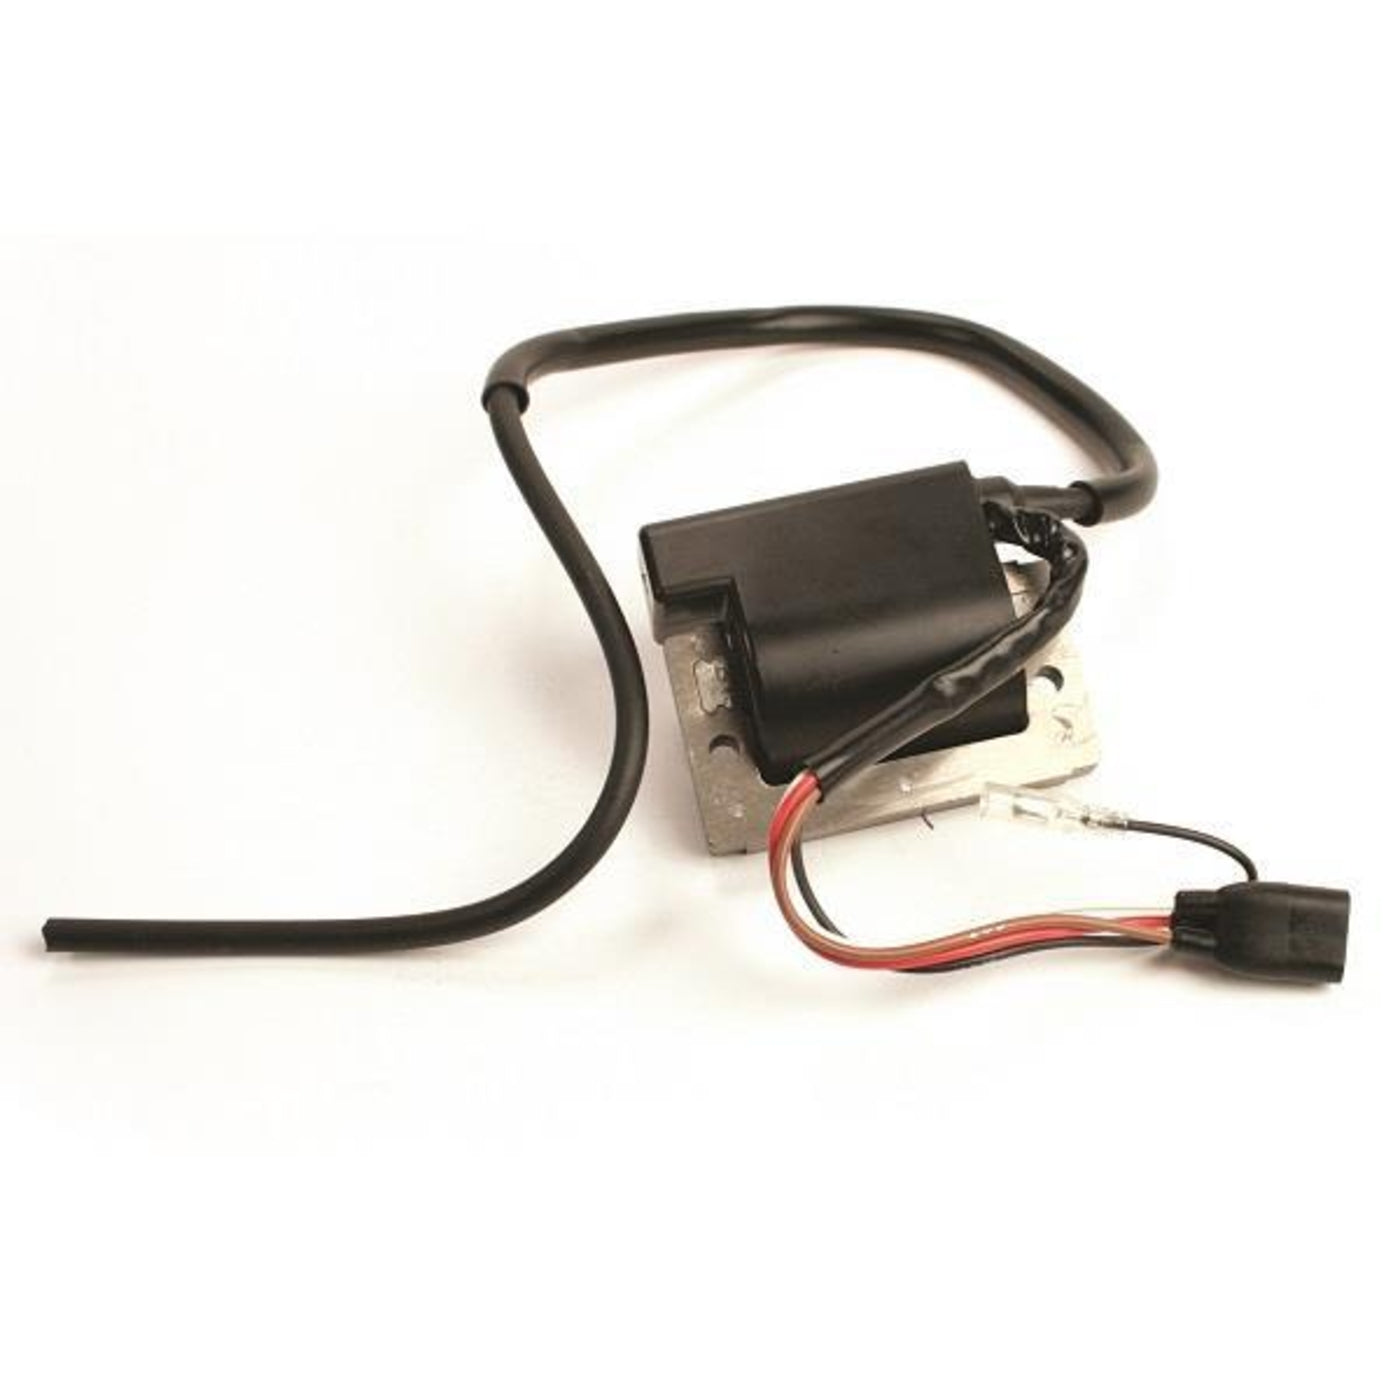 Club Car Ignition Coil (Years 1984-1989)